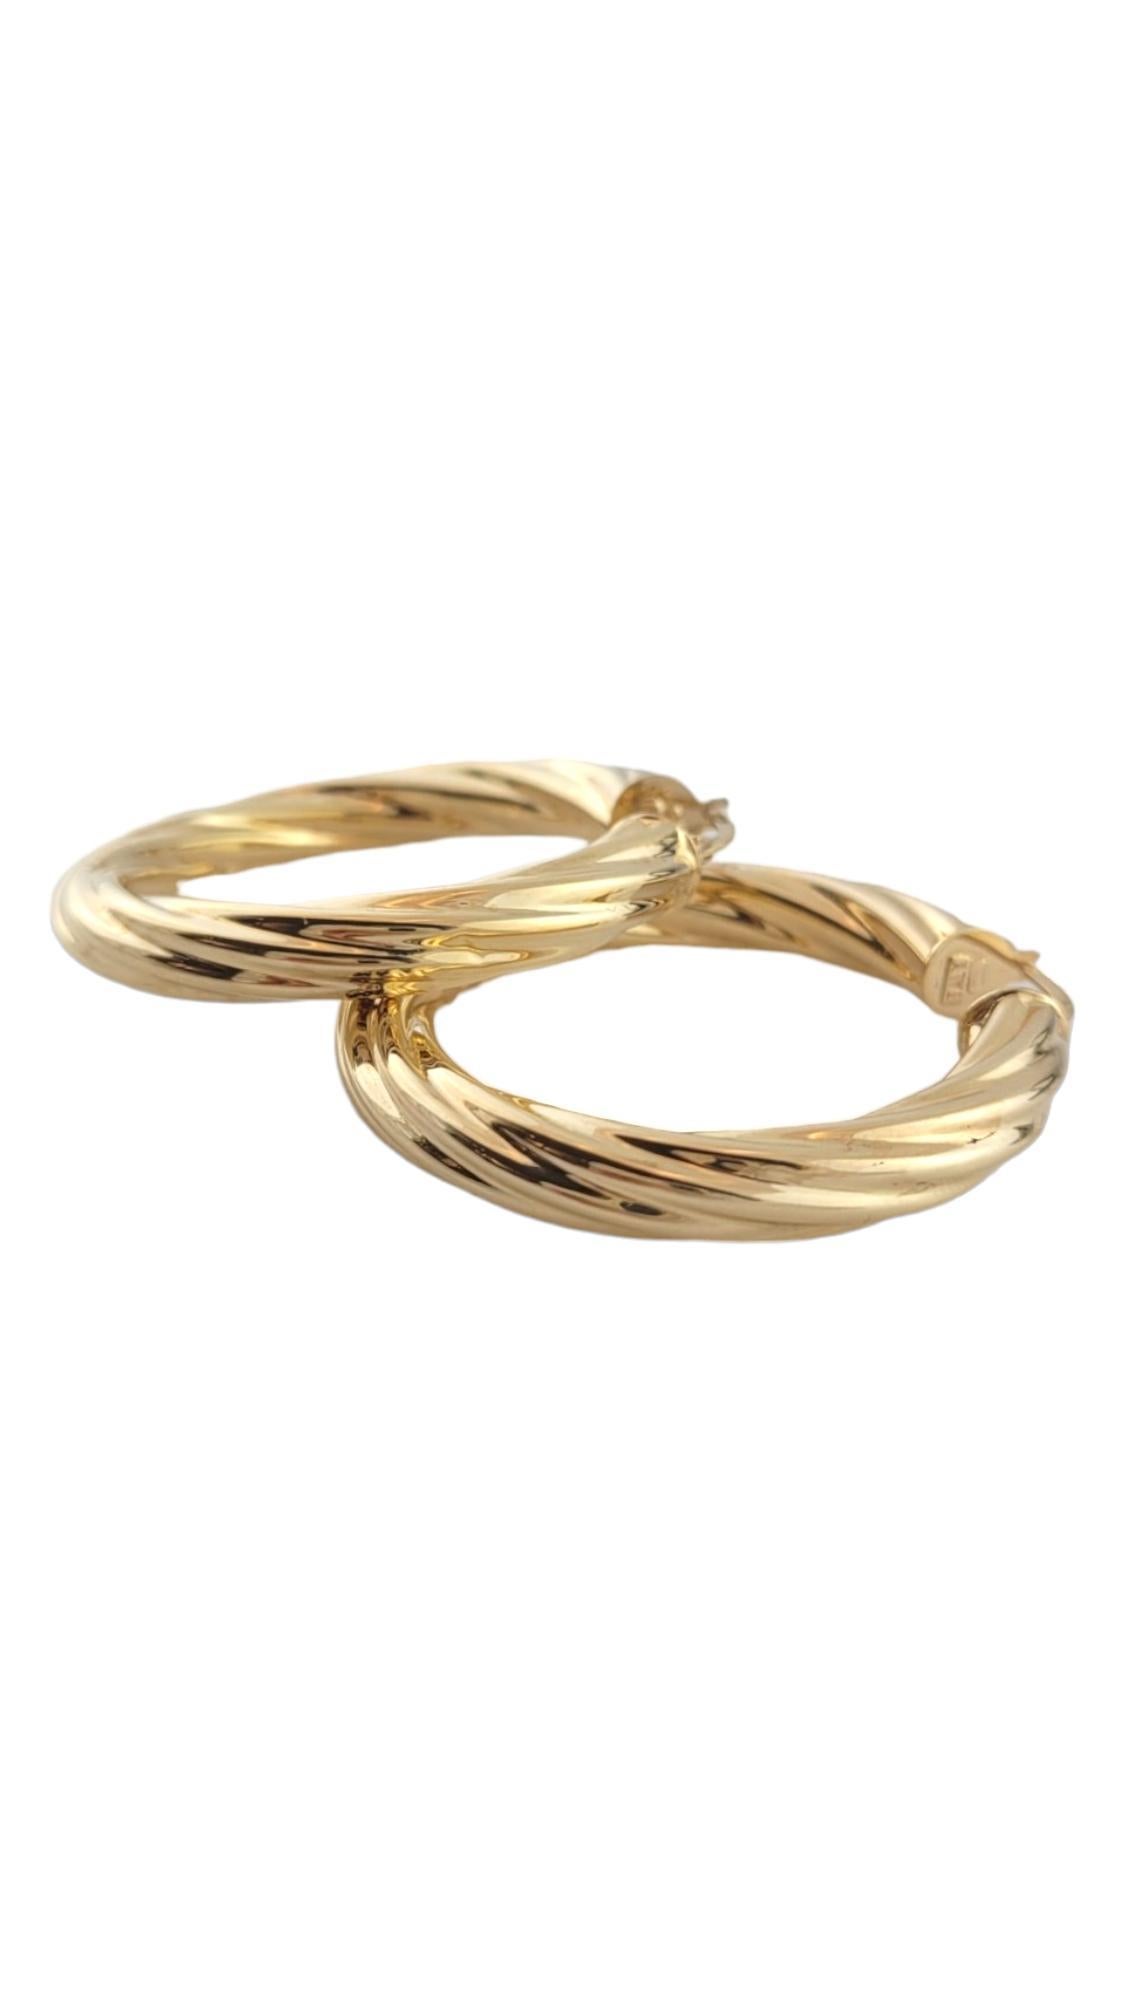 14K Yellow Gold Twisted Circle Hoop Earrings #16197 In Good Condition For Sale In Washington Depot, CT